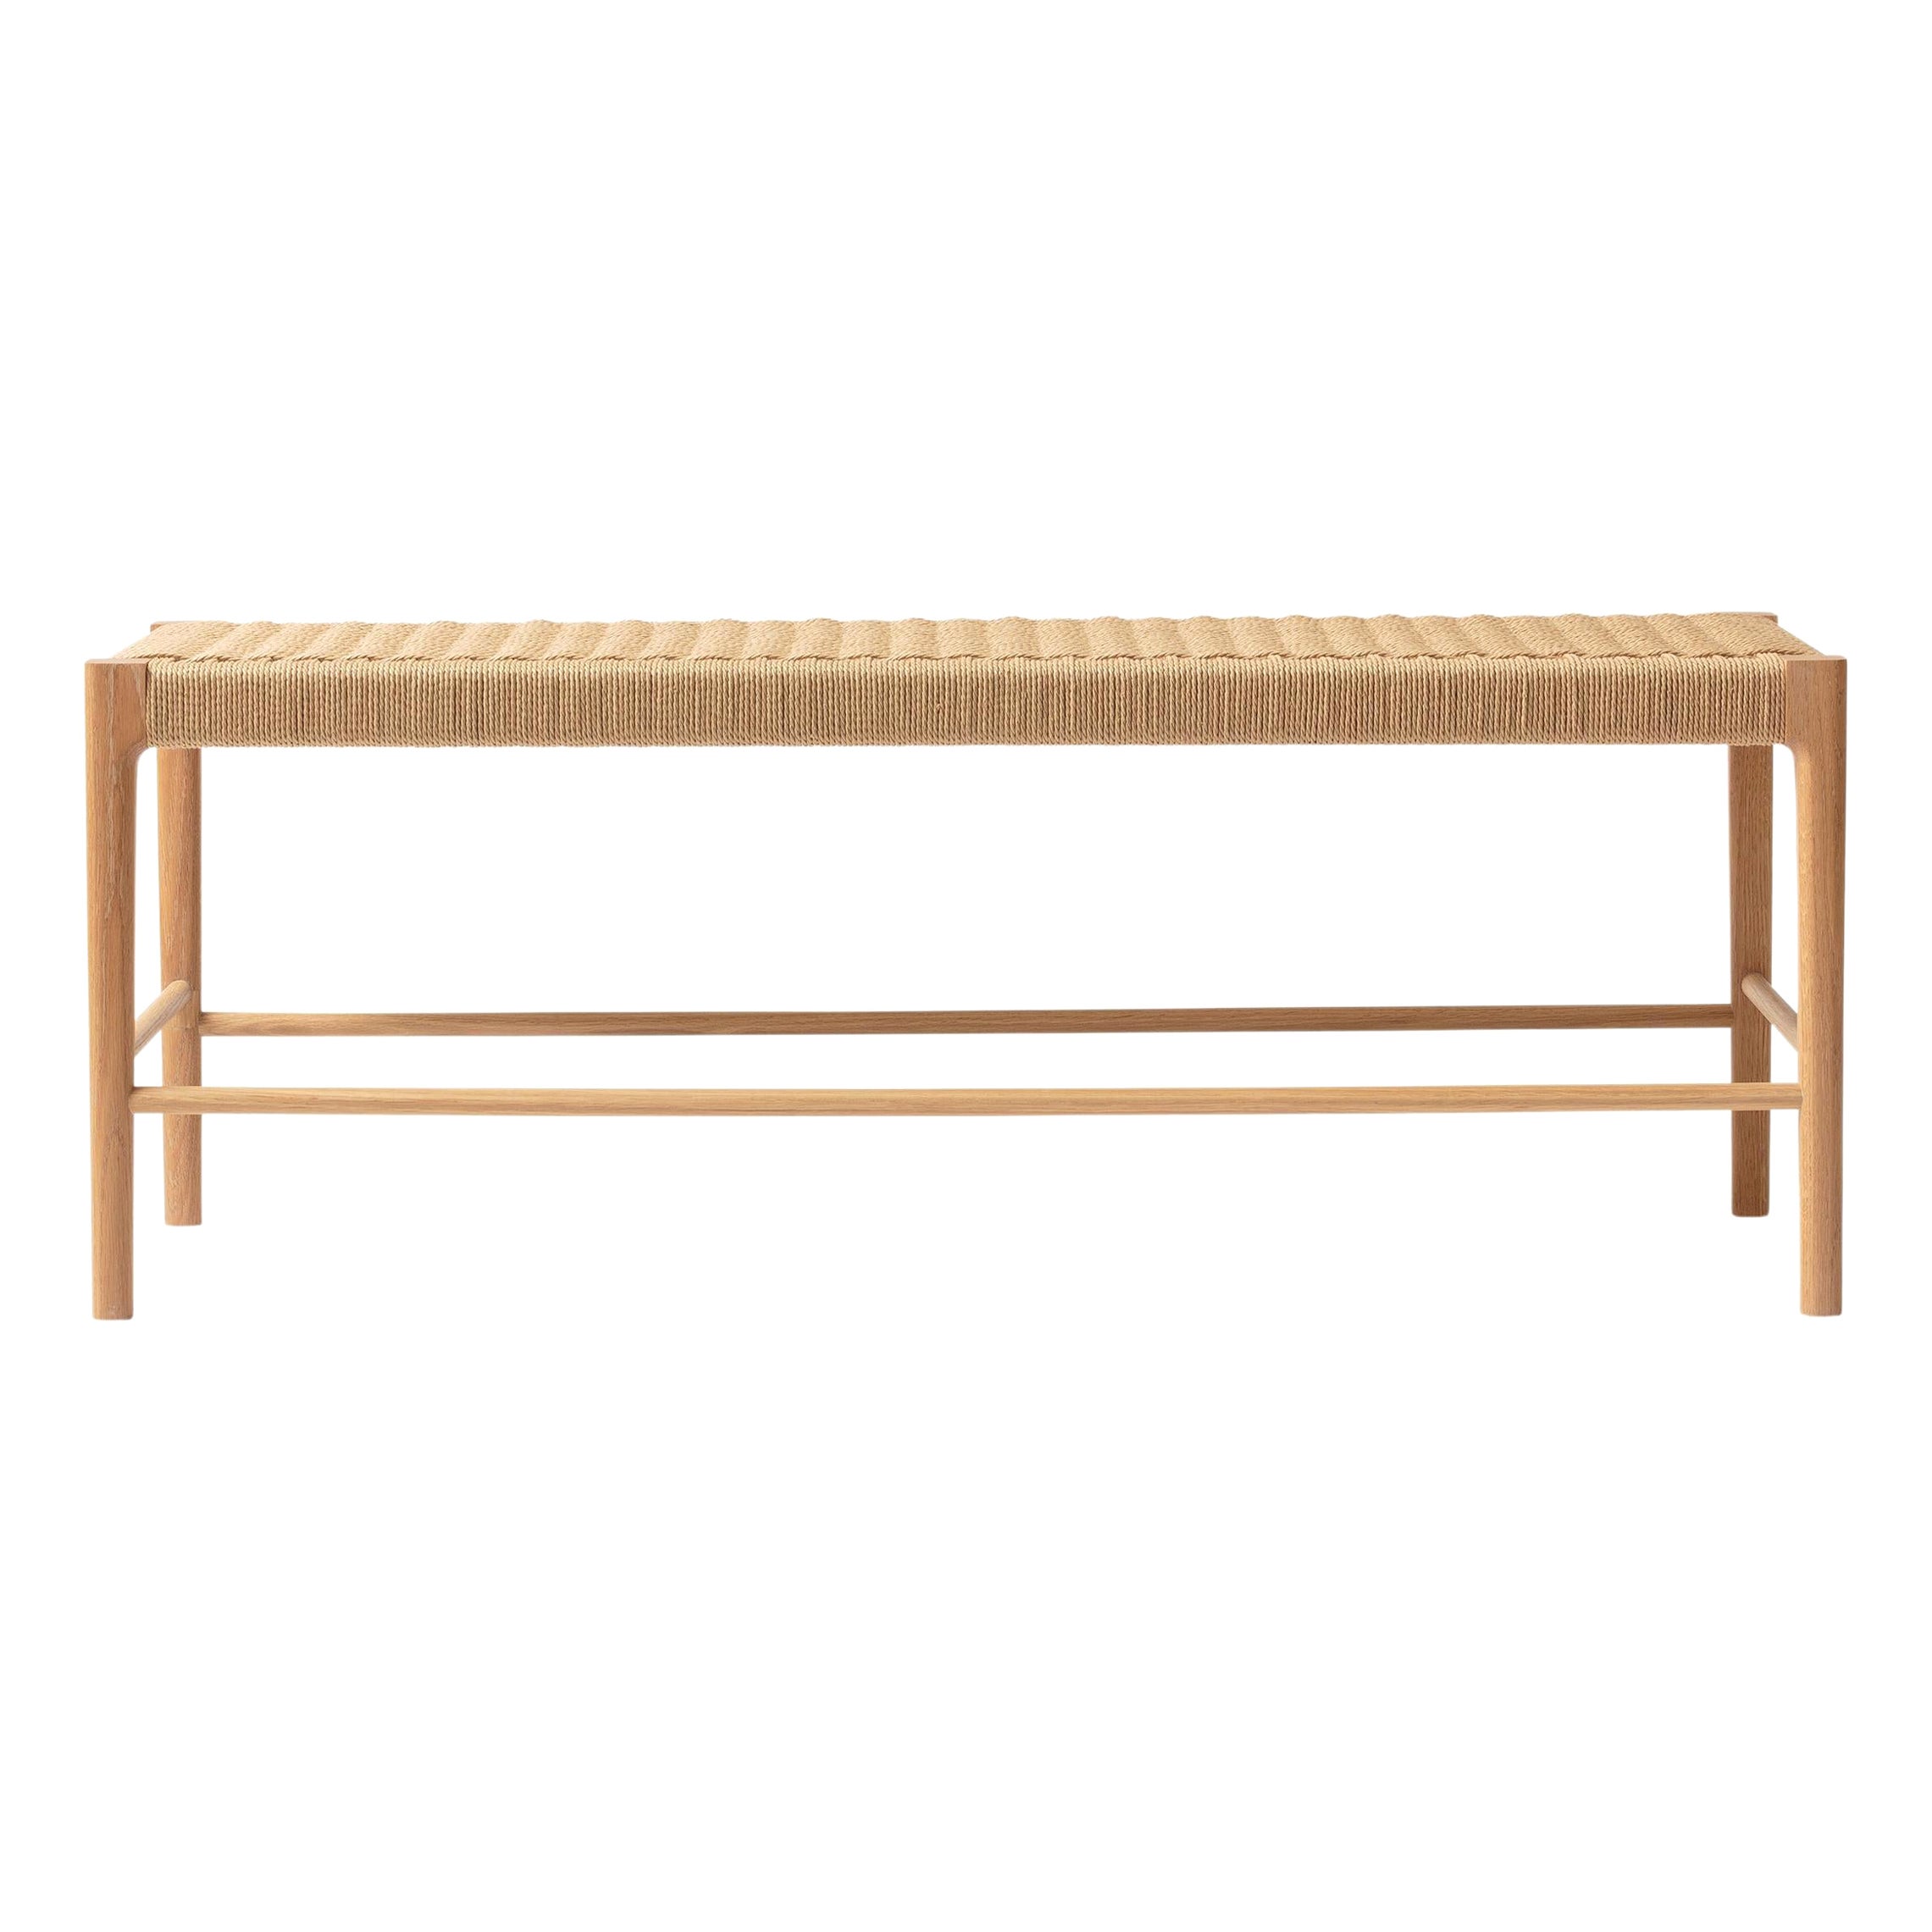 Papyri Bench, Occasional Woven Bench in White Oak and Natural Danish Chord For Sale